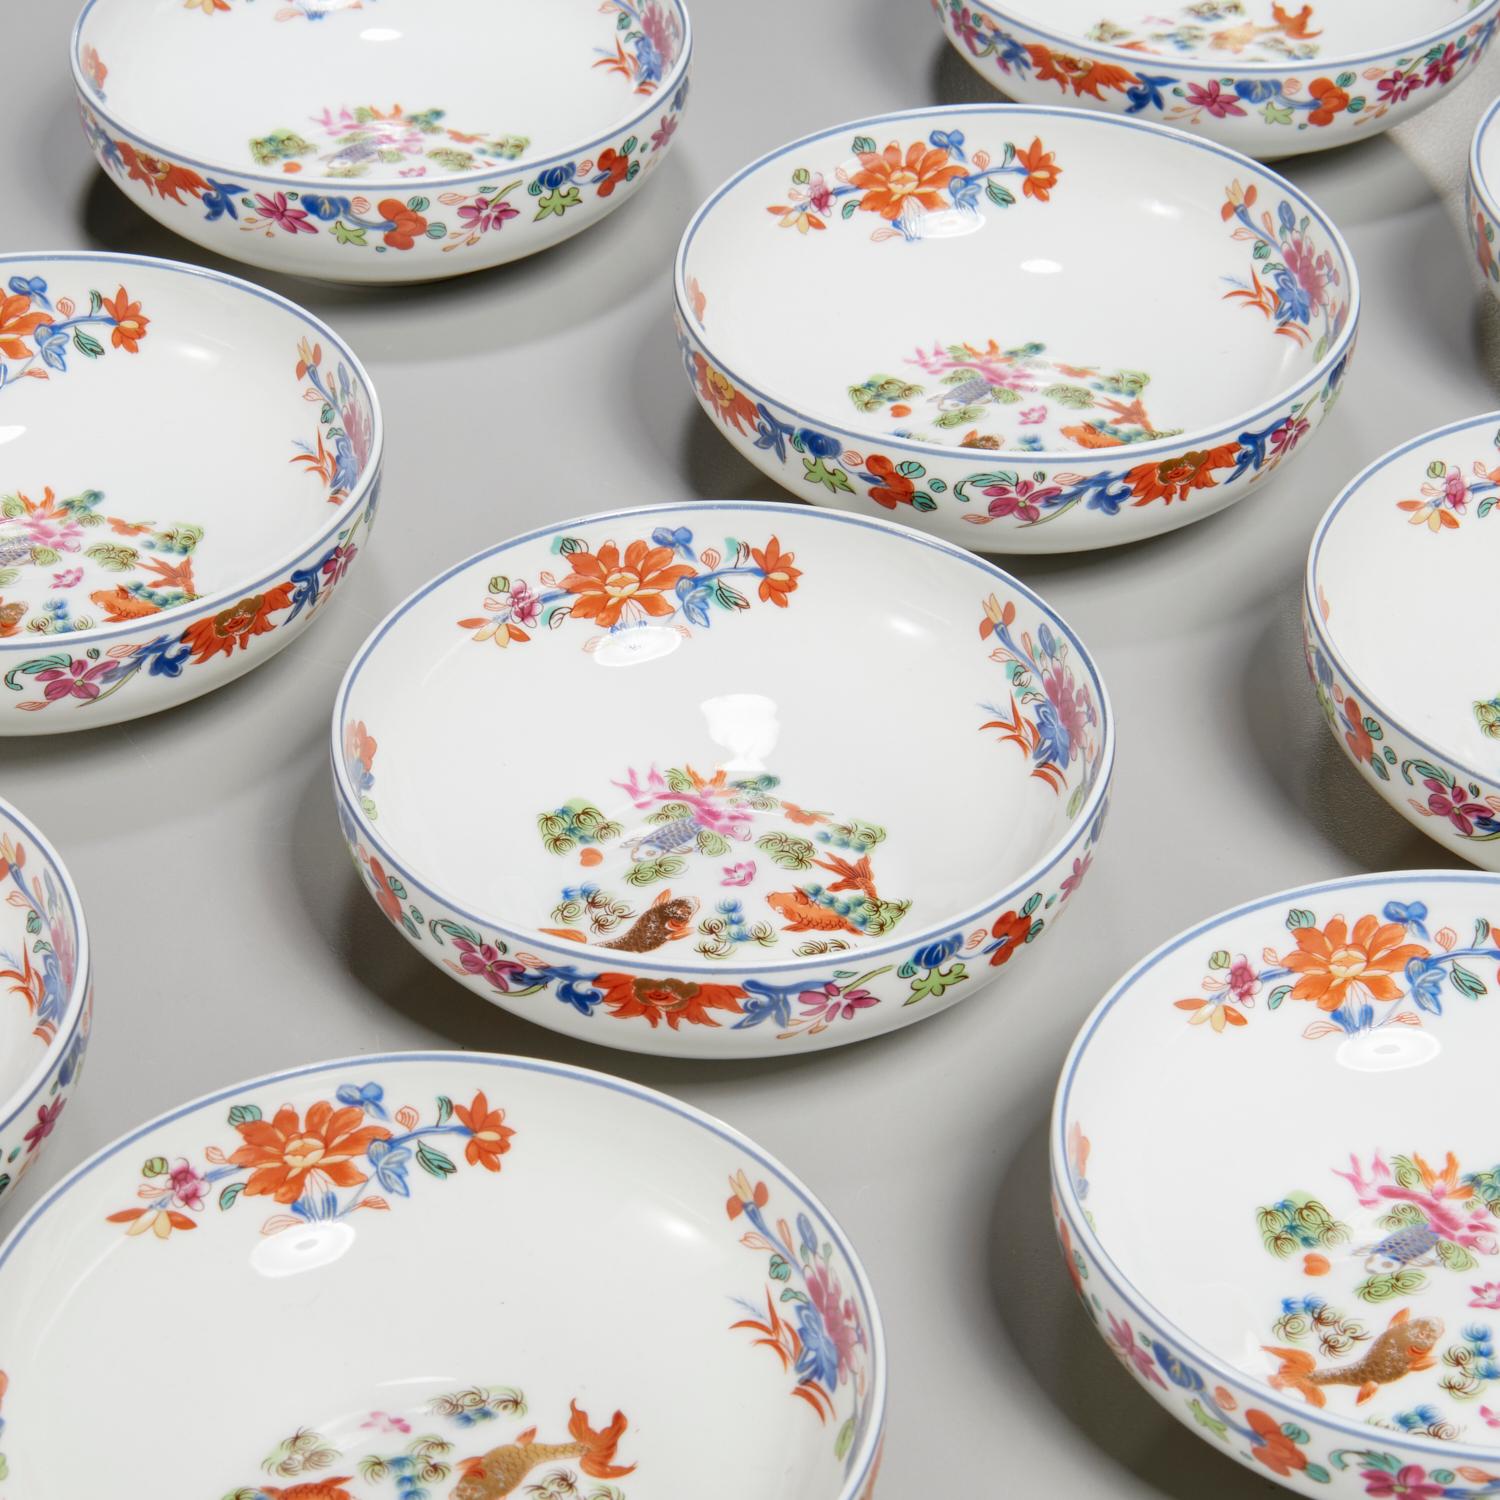 Late 20th Century 133 Piece House of Puiforcat Kiang She Dinner Service for 12 by Limoges, France For Sale